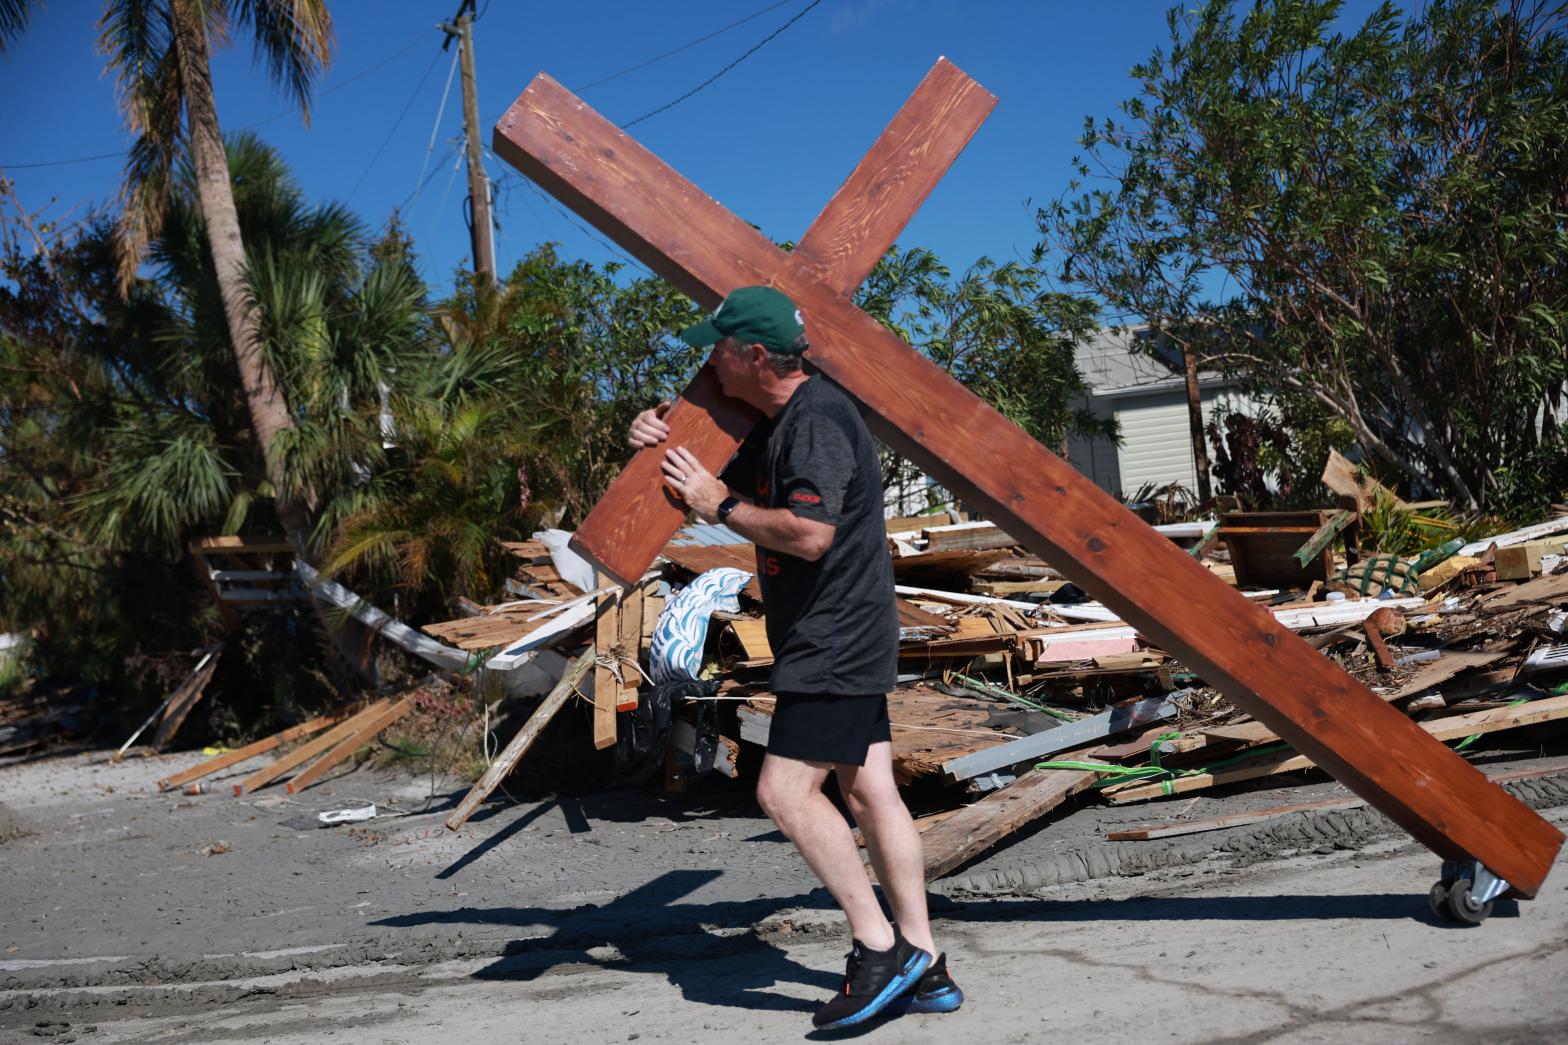 Damage from Hurricane Ian in Fort Myers, Florida, on October 1, 2022. (Photo: Joe Raedle, Getty Images)